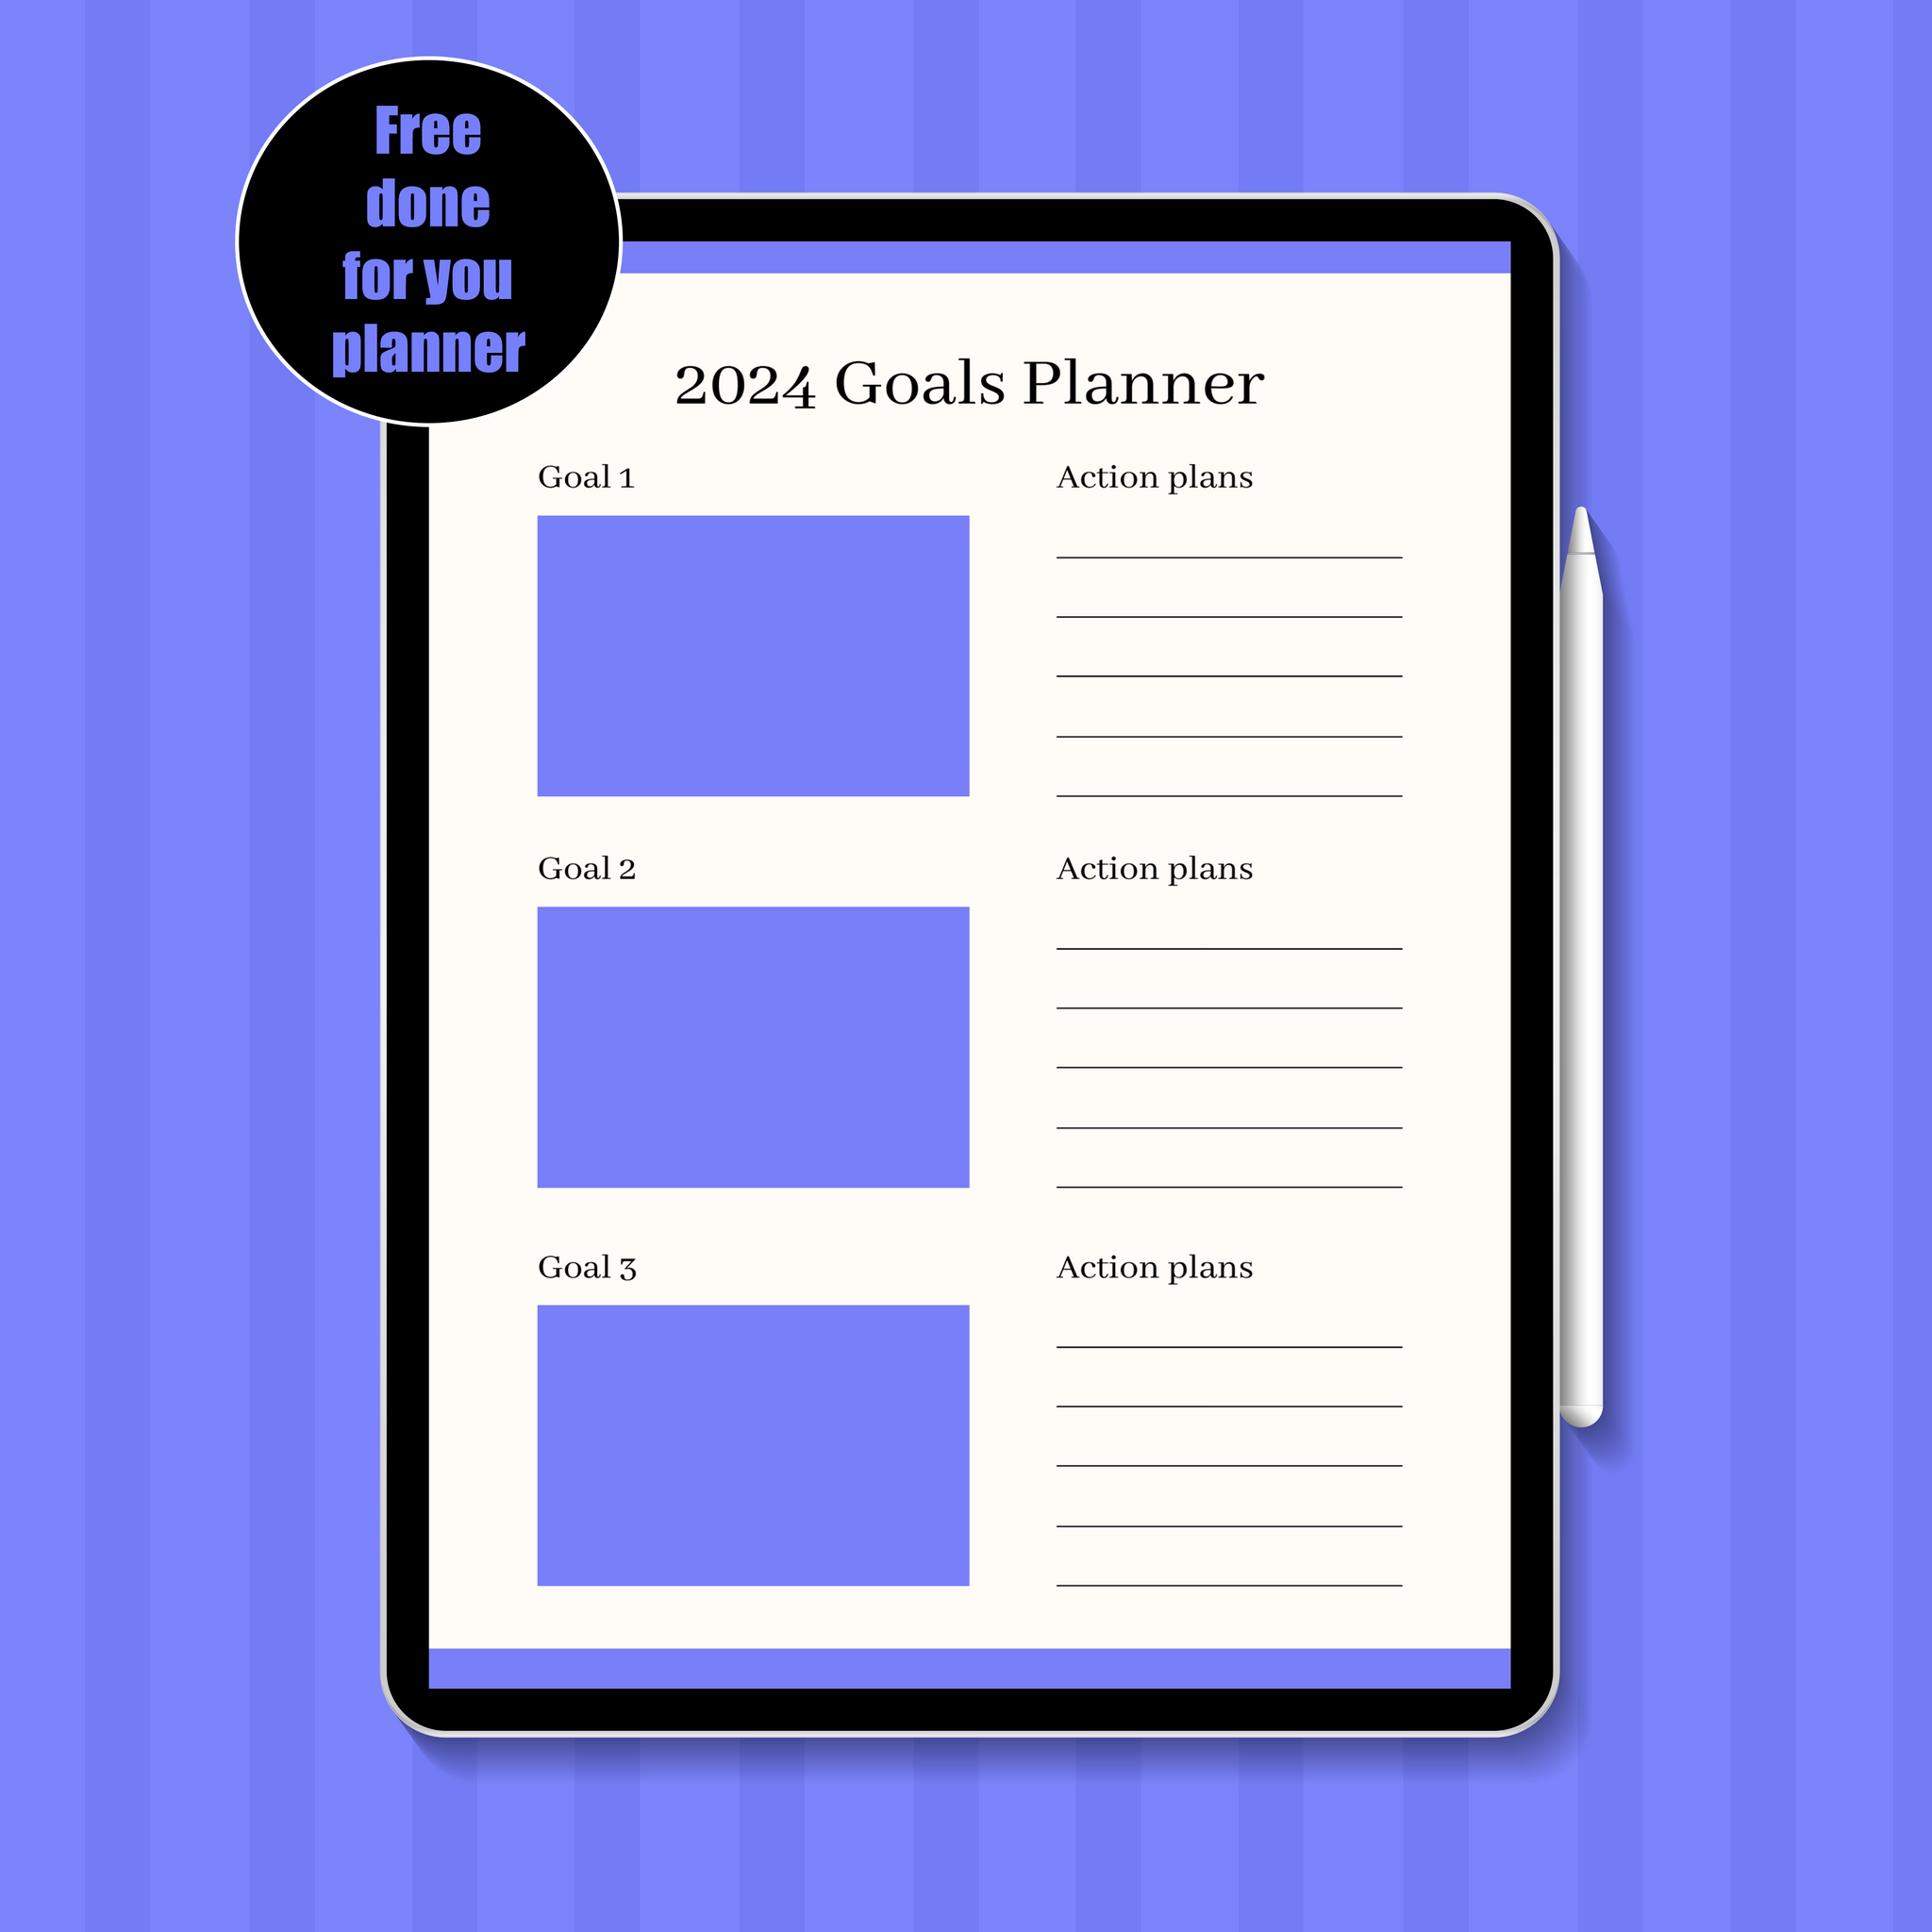 Free "done for you" planner